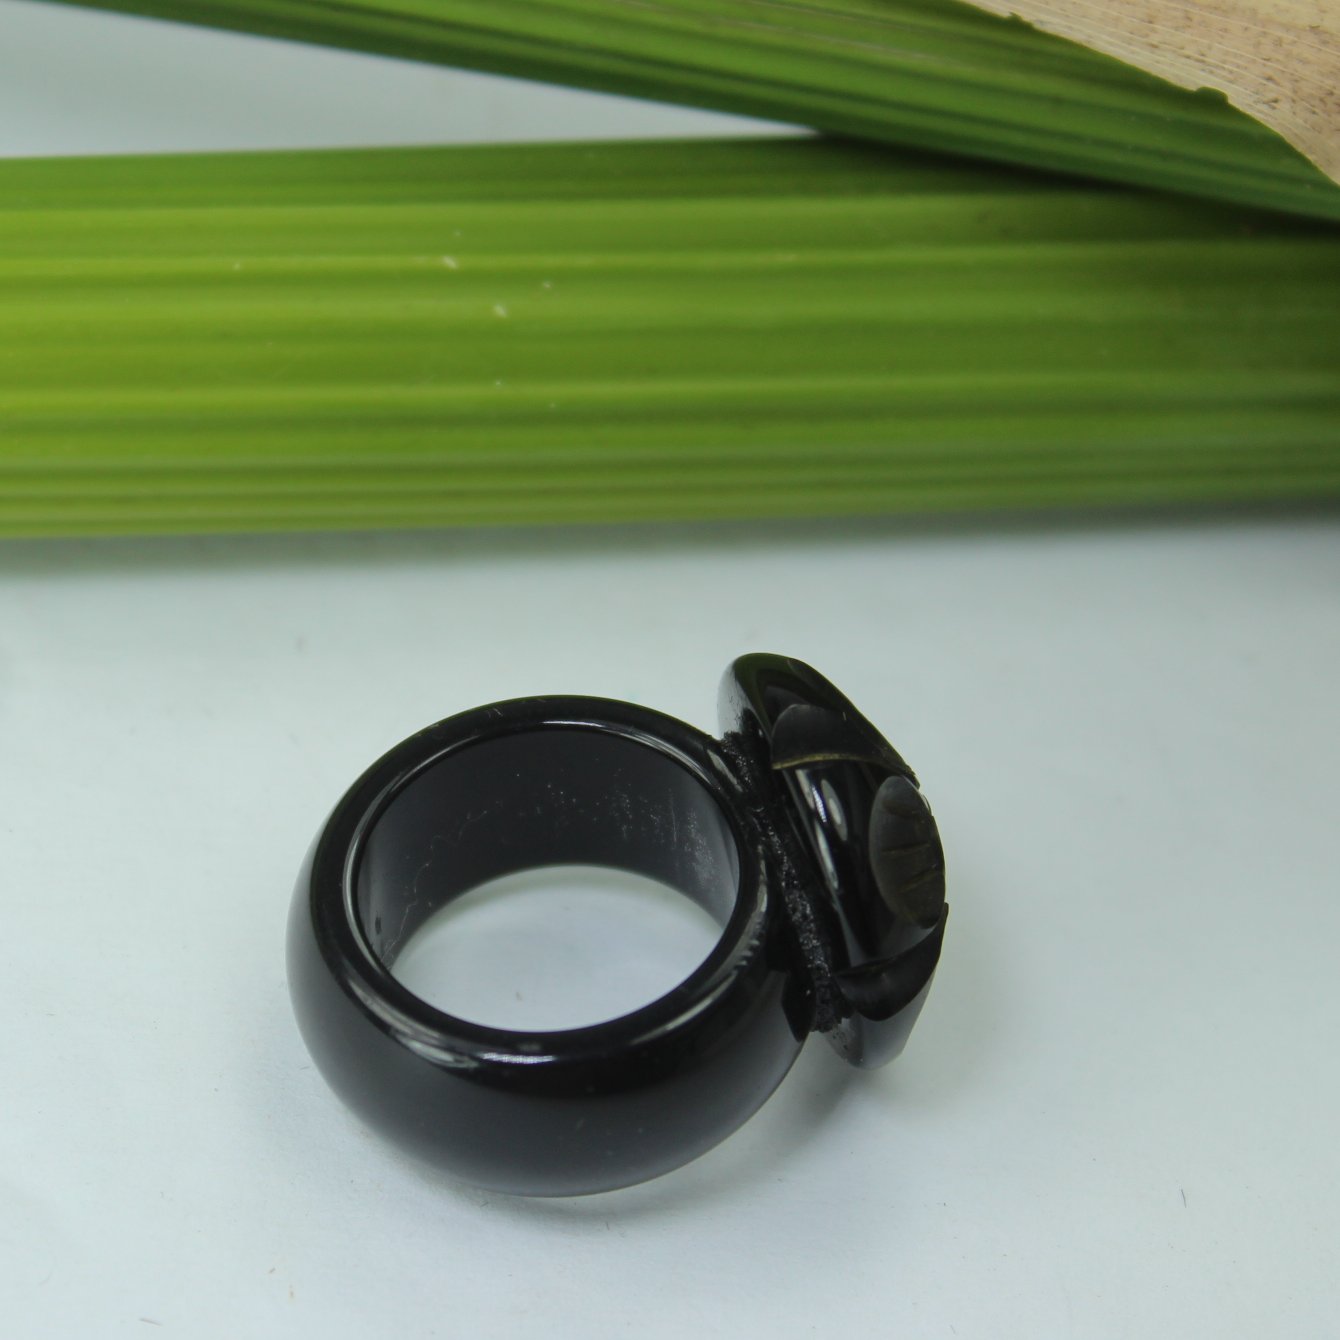 Unique Vintage Black Bakelite Phenolic Ring Applied Carved Flower Stunning other view of ring